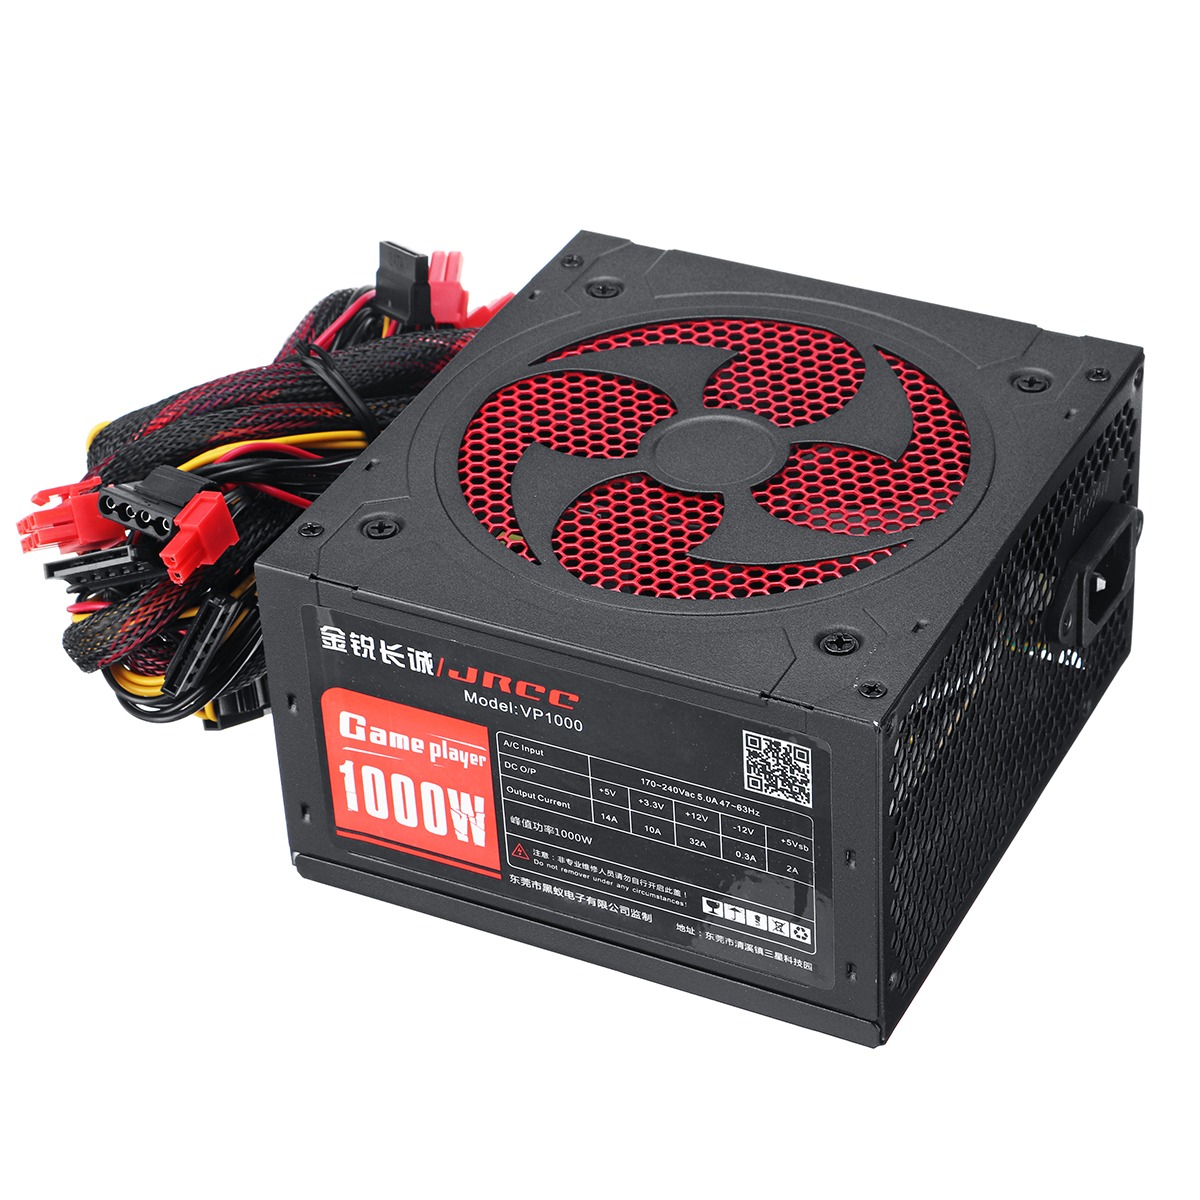 Find 1000W ATX 12V 2.31 PC Power Supply PFC INTEL ATX12V 2.31 8PIN+2x6PIN LED Fan Computer for Sale on Gipsybee.com with cryptocurrencies